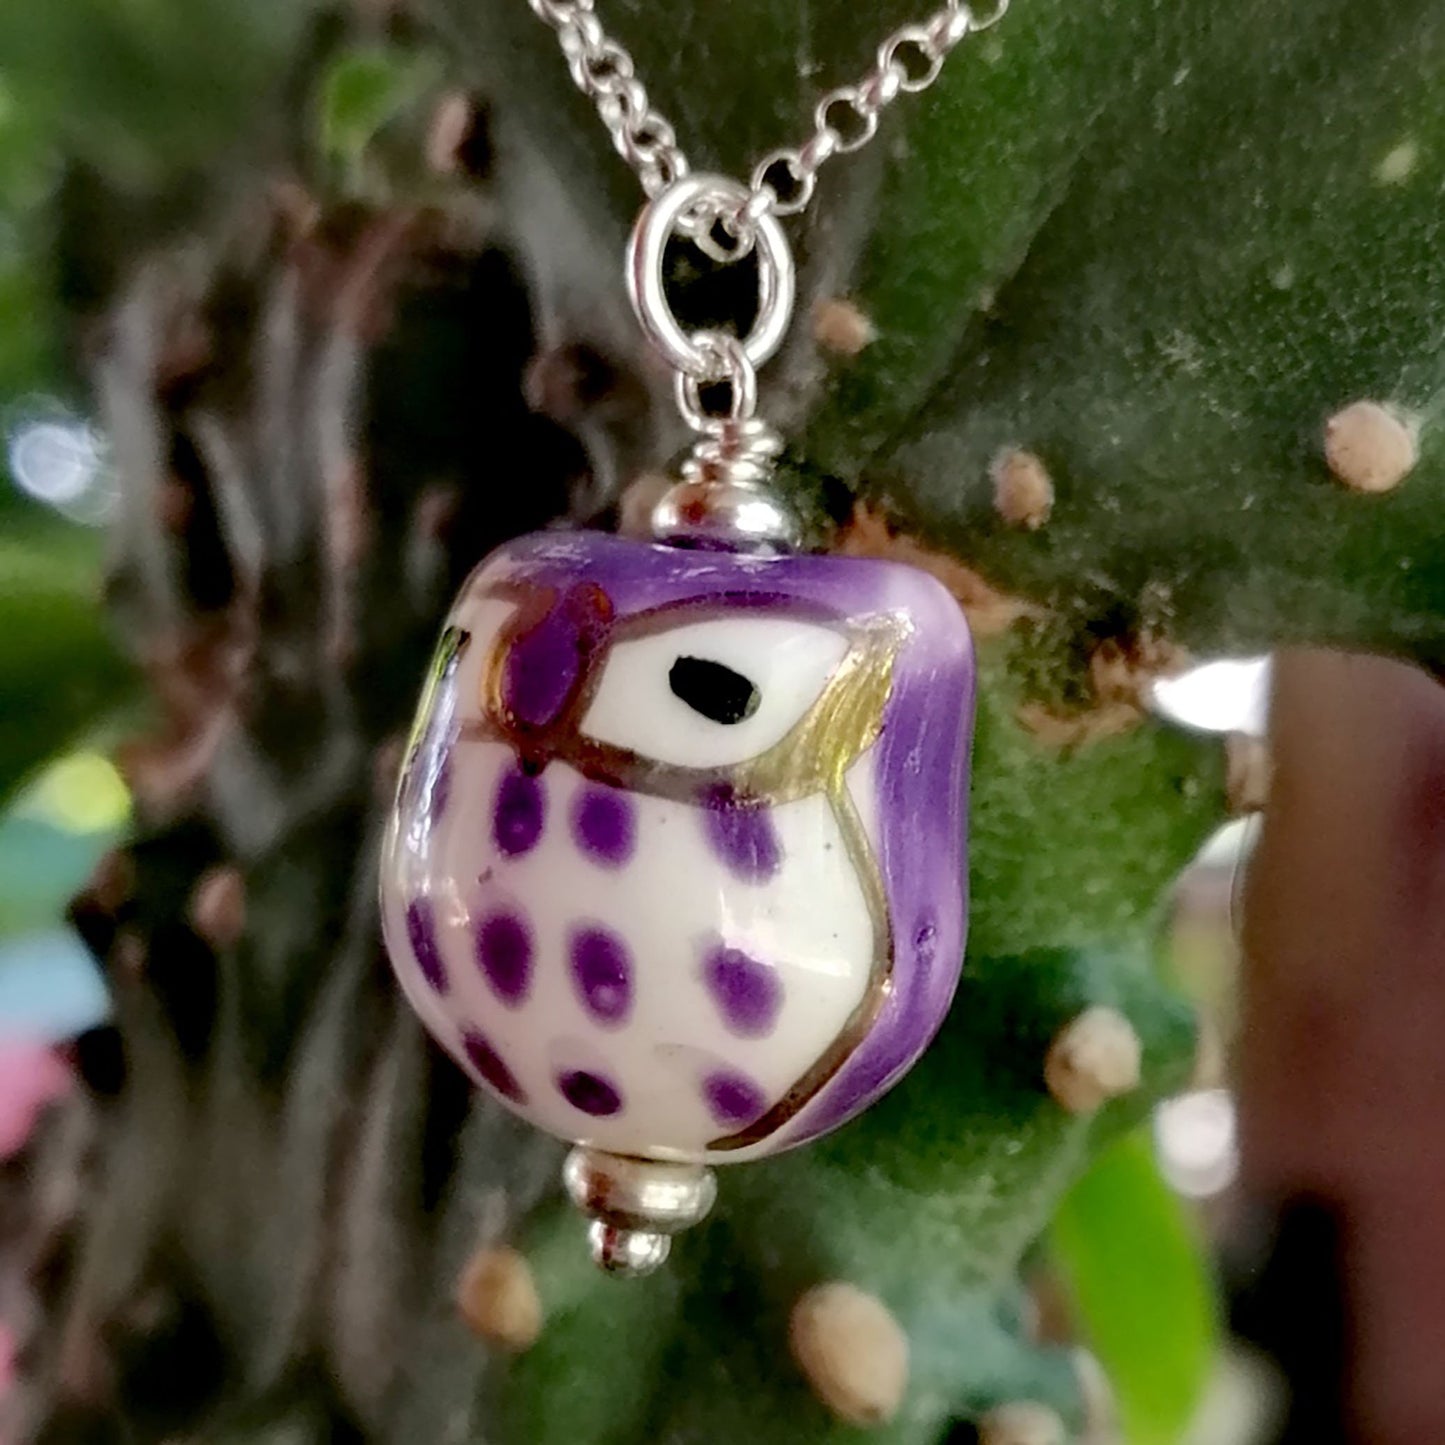 Purple Owl with White Eyes Necklace and Earring Set